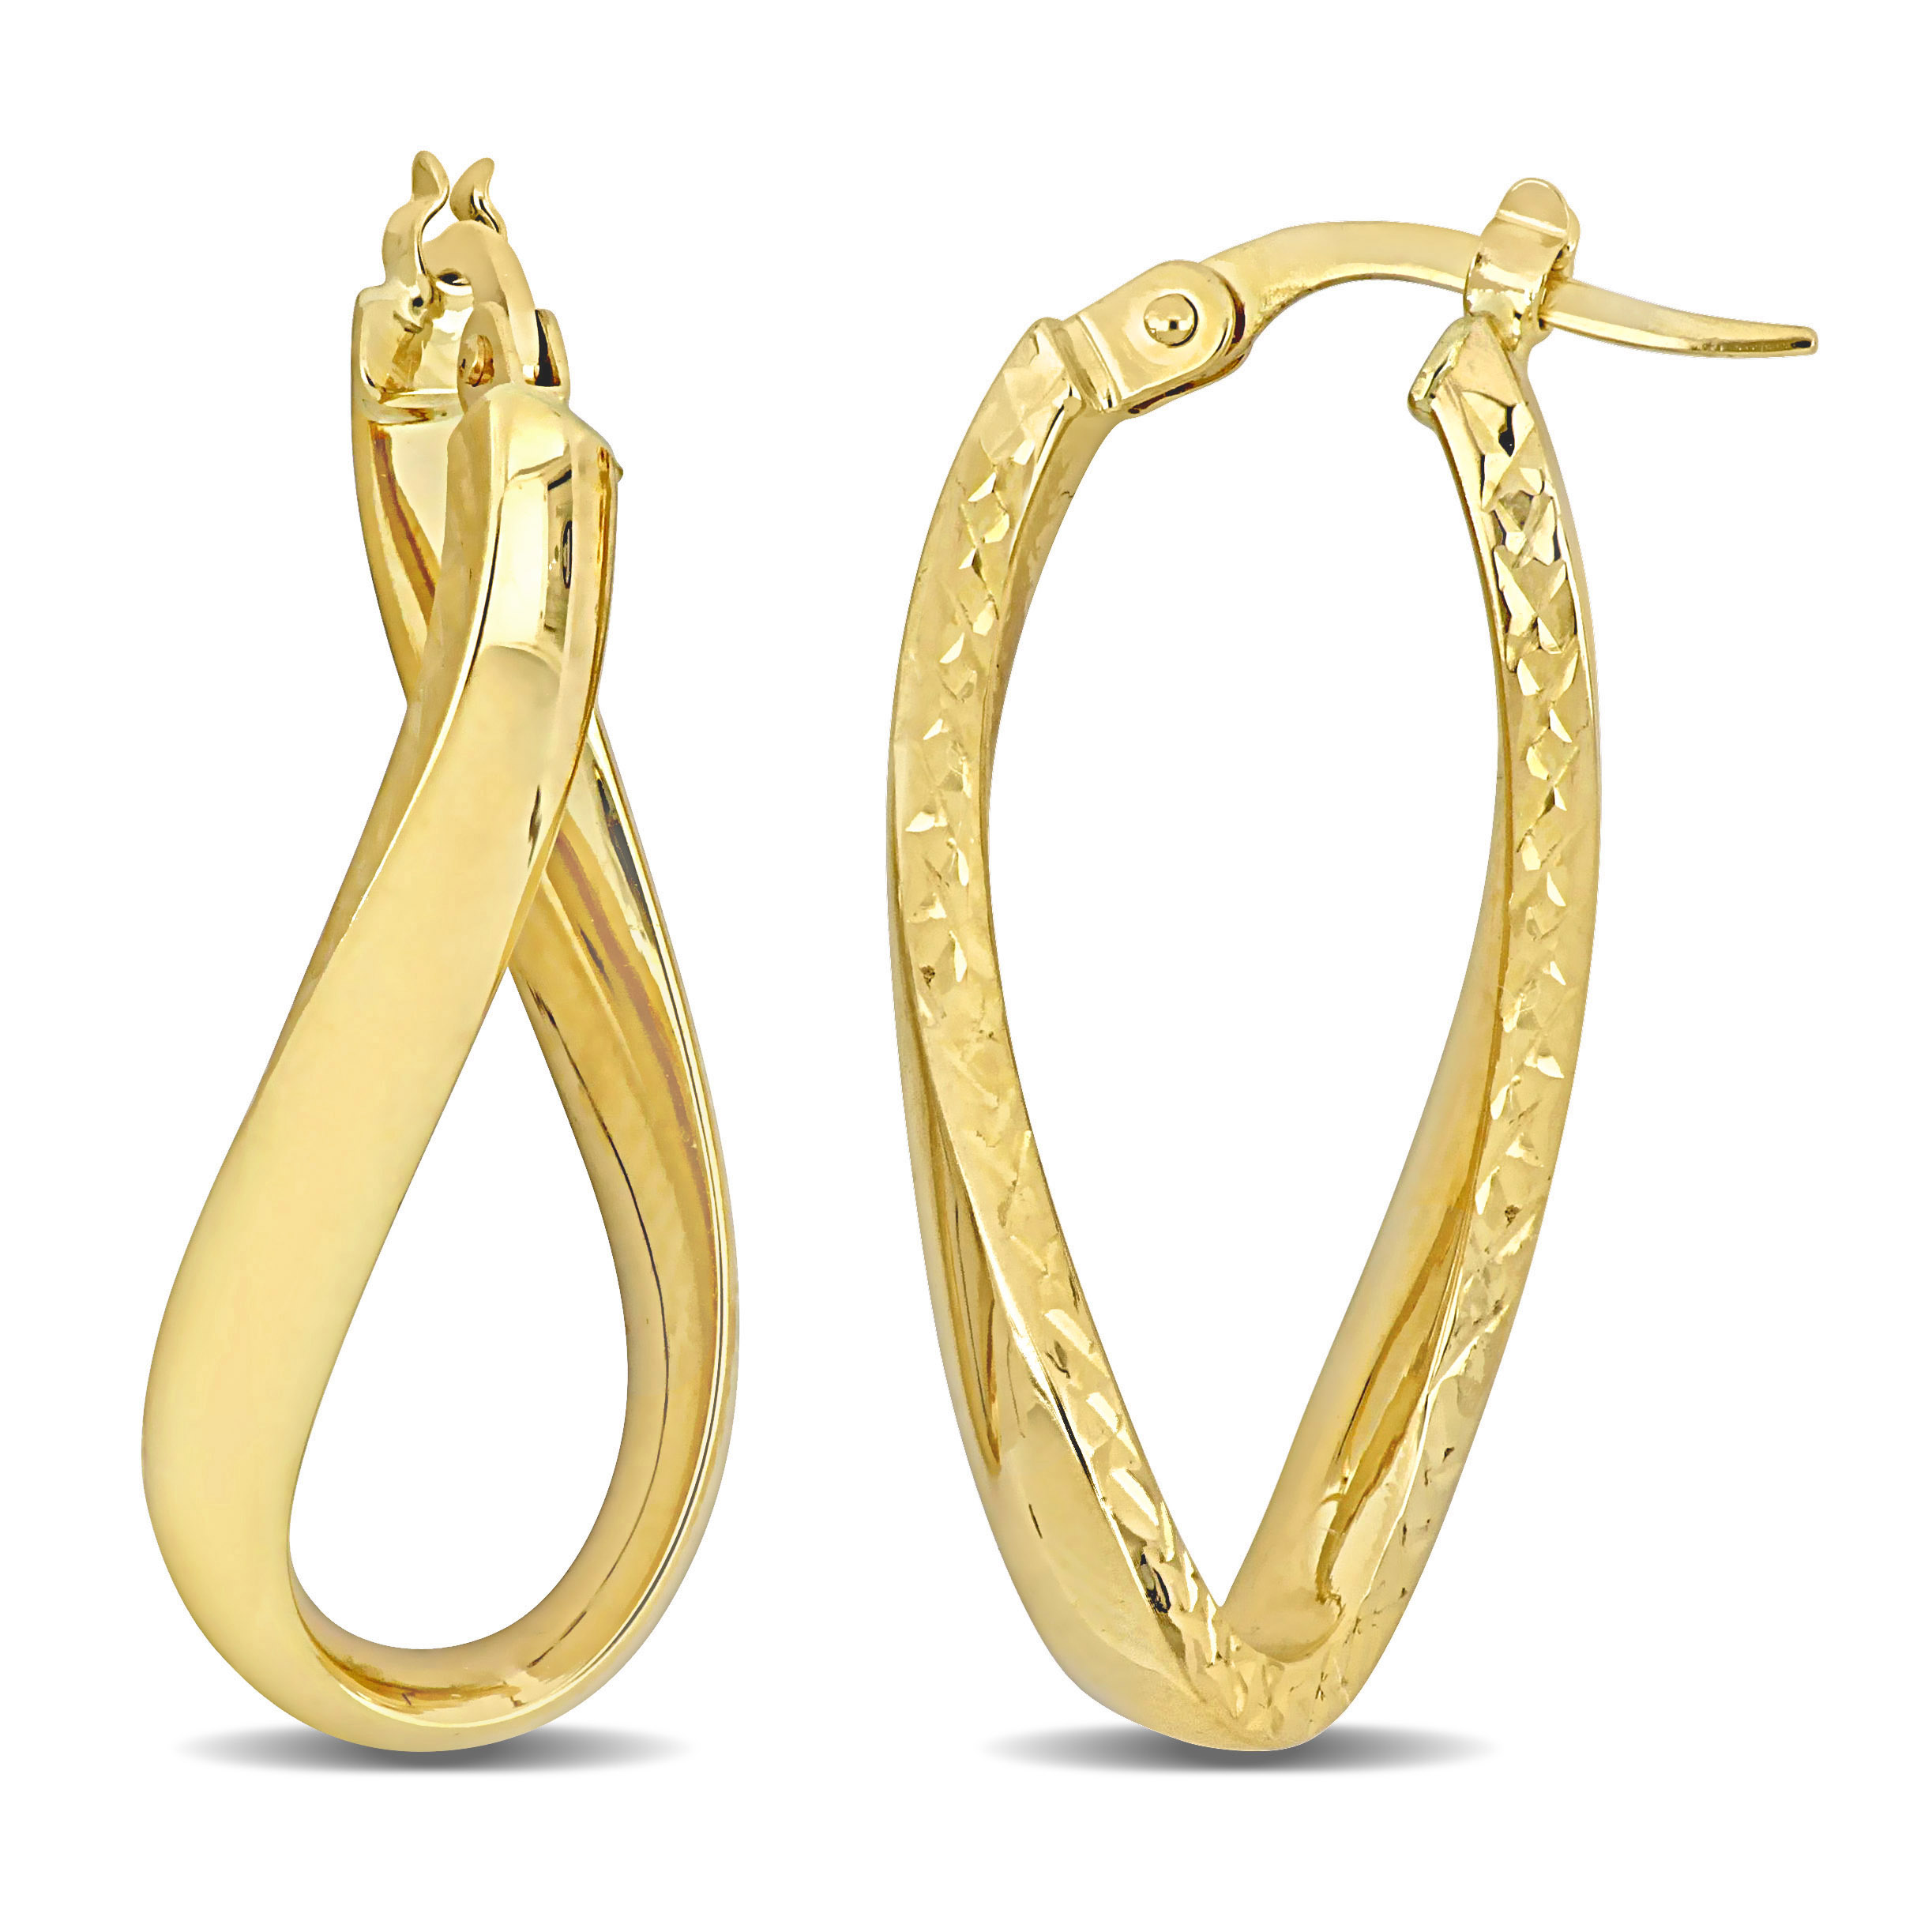 28 MM Oval Twist Texture and Polished Hoop Earrings in 14k Yellow Gold